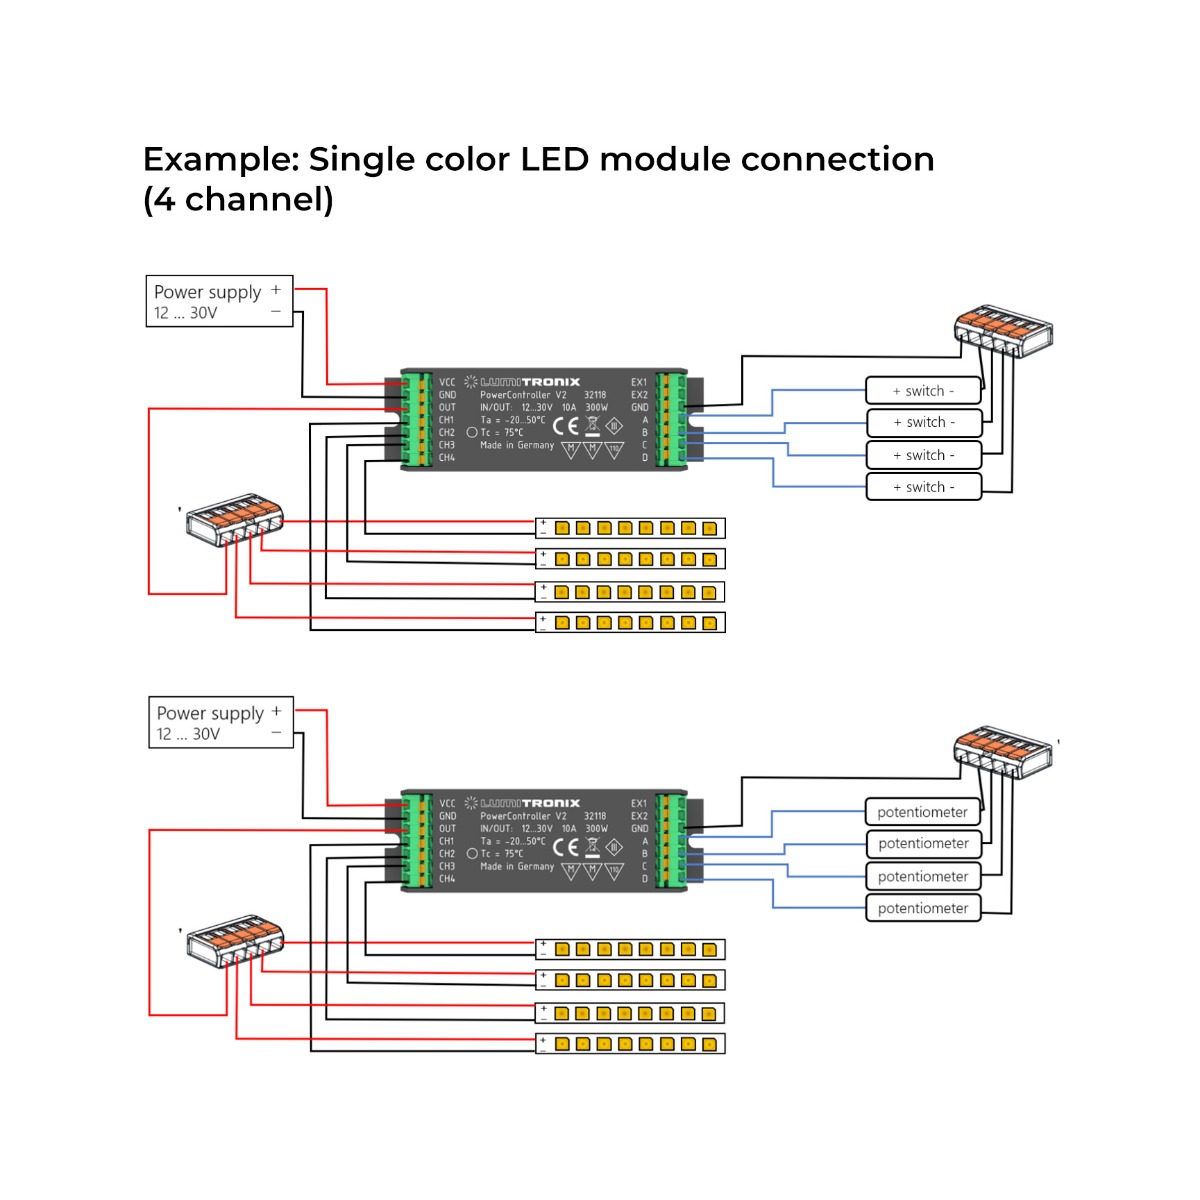 PowerController V2 Light Control Unit 1- 4 control channels for Tunable White, RGBW or single color